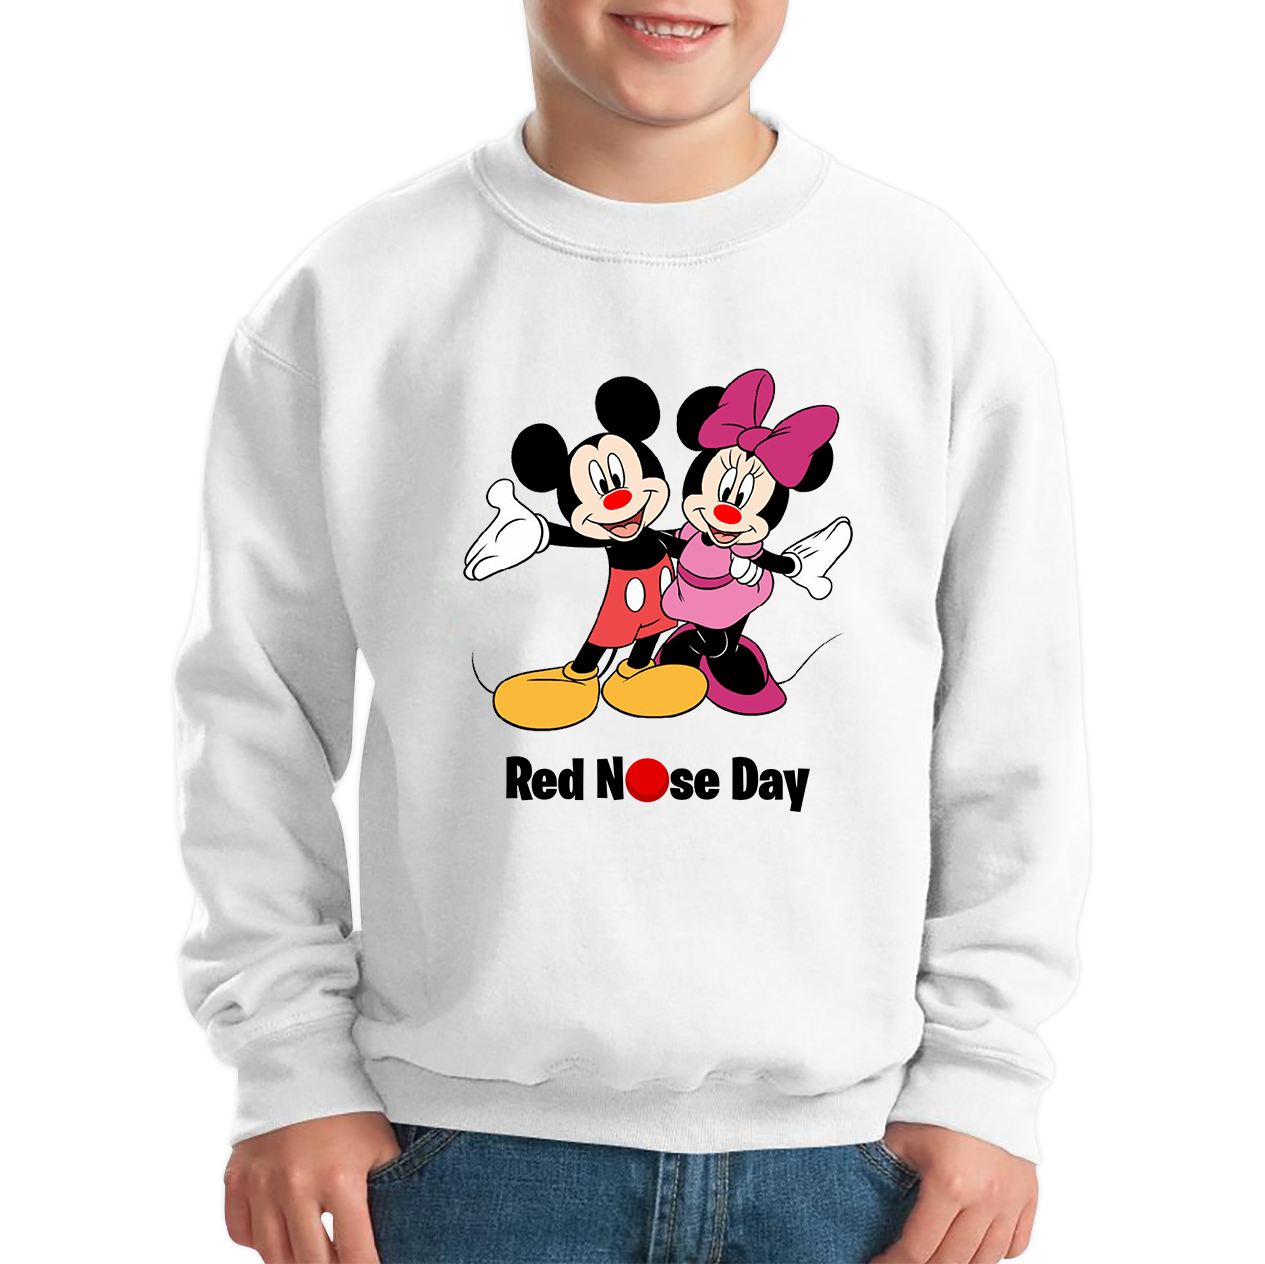 Mickey And Minnie Mouse Red Nose Day Kids Sweatshirt. 50% Goes To Charity